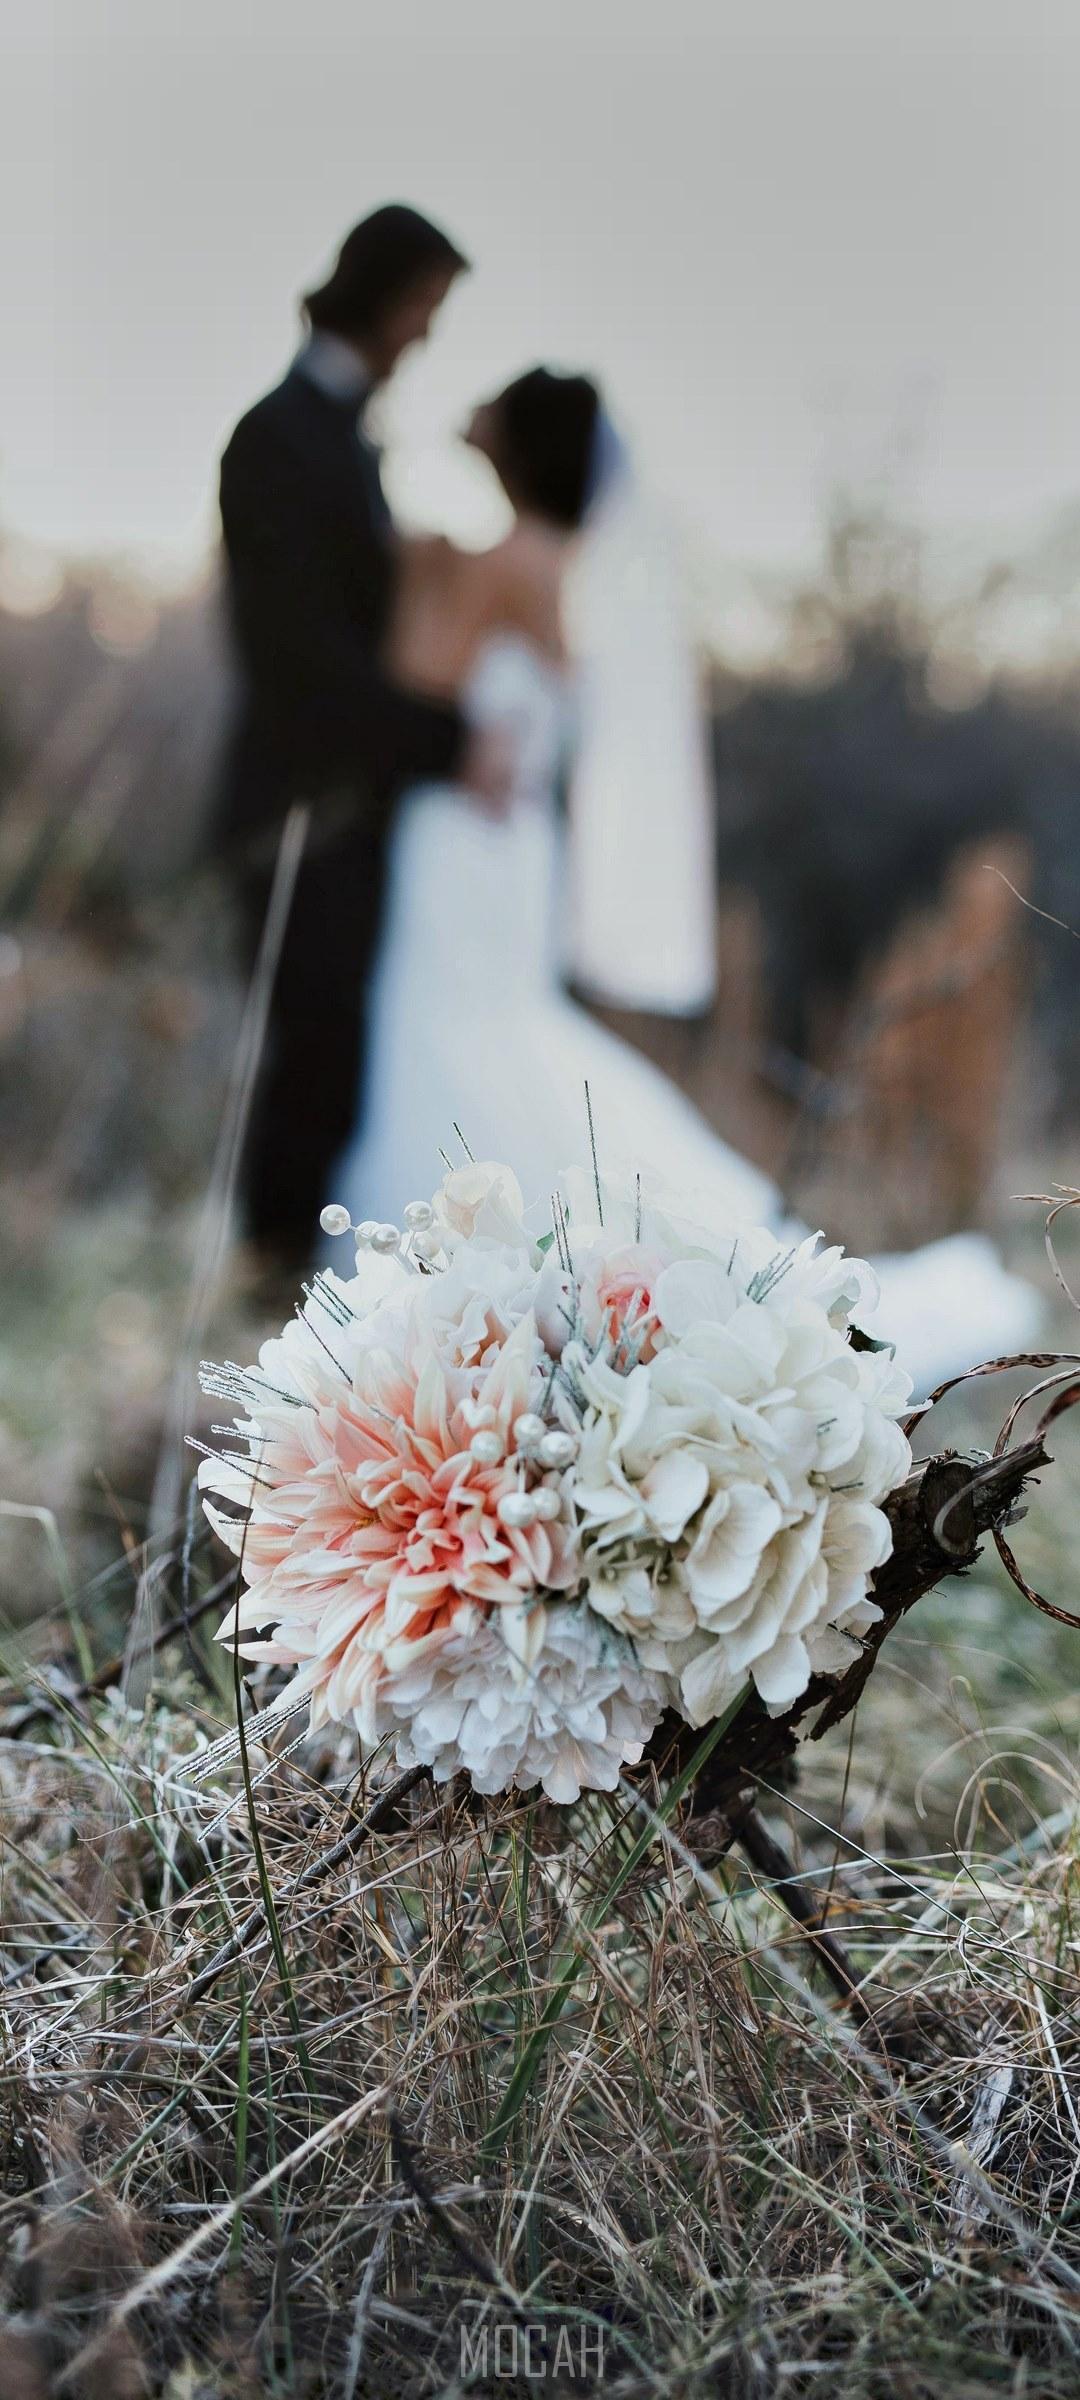 HD wallpaper, Wedding Evening, A Bouquet Sits In Tall Grass While A Married Couple Embraces In The Fuzzy Background, Honor 30S Screensaver, 1080X2400